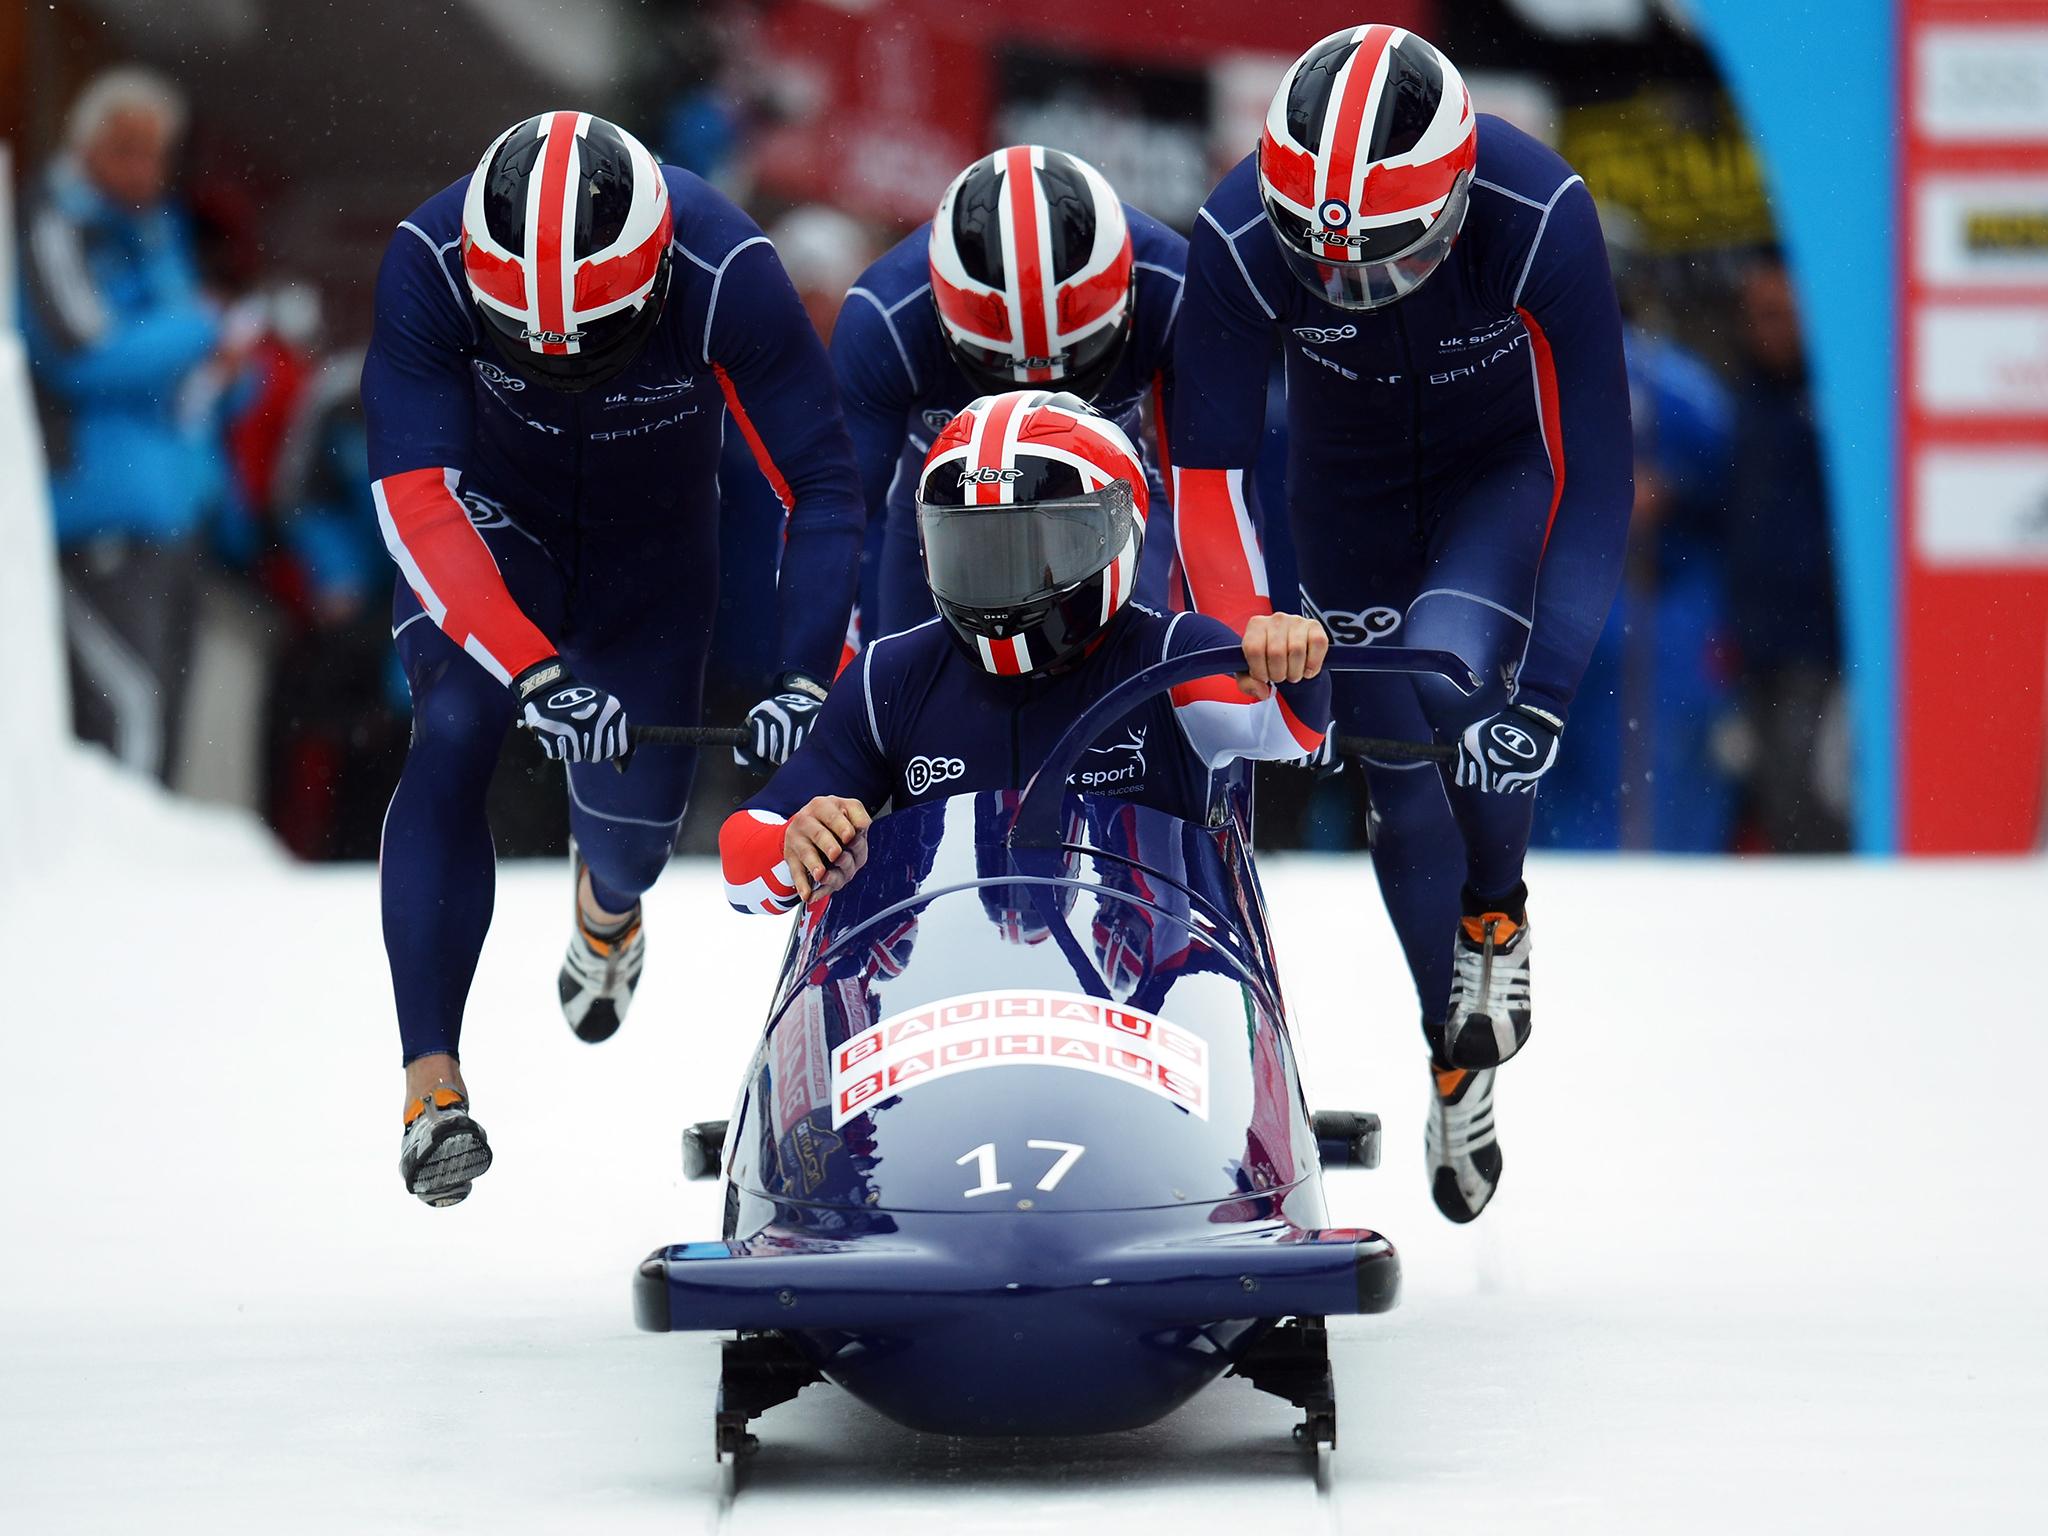 Team GB's bobsleigh team win Winter Olympics bronze five years after Sochi 2014 due to Russian doping